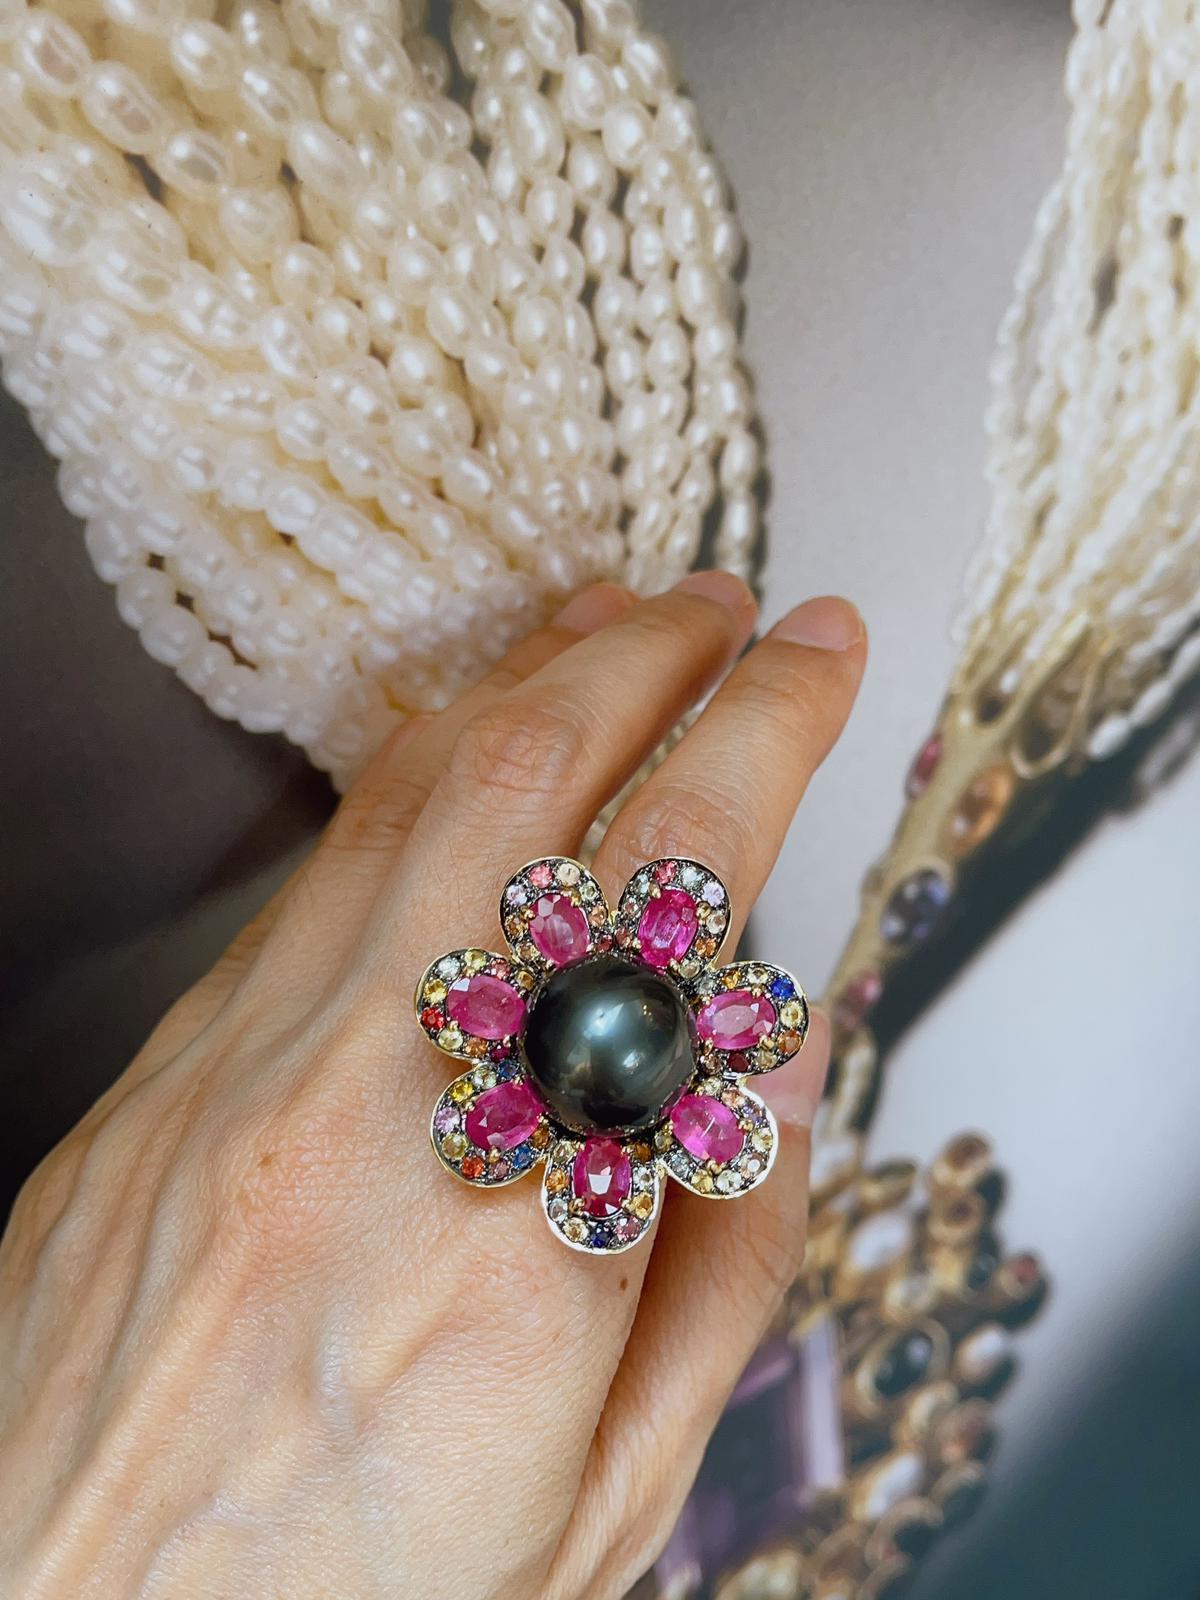 Bochic “Capri” Black Pearl & Pink Sapphire Cocktail Ring Set in 22k Gold & Silve In New Condition For Sale In New York, NY